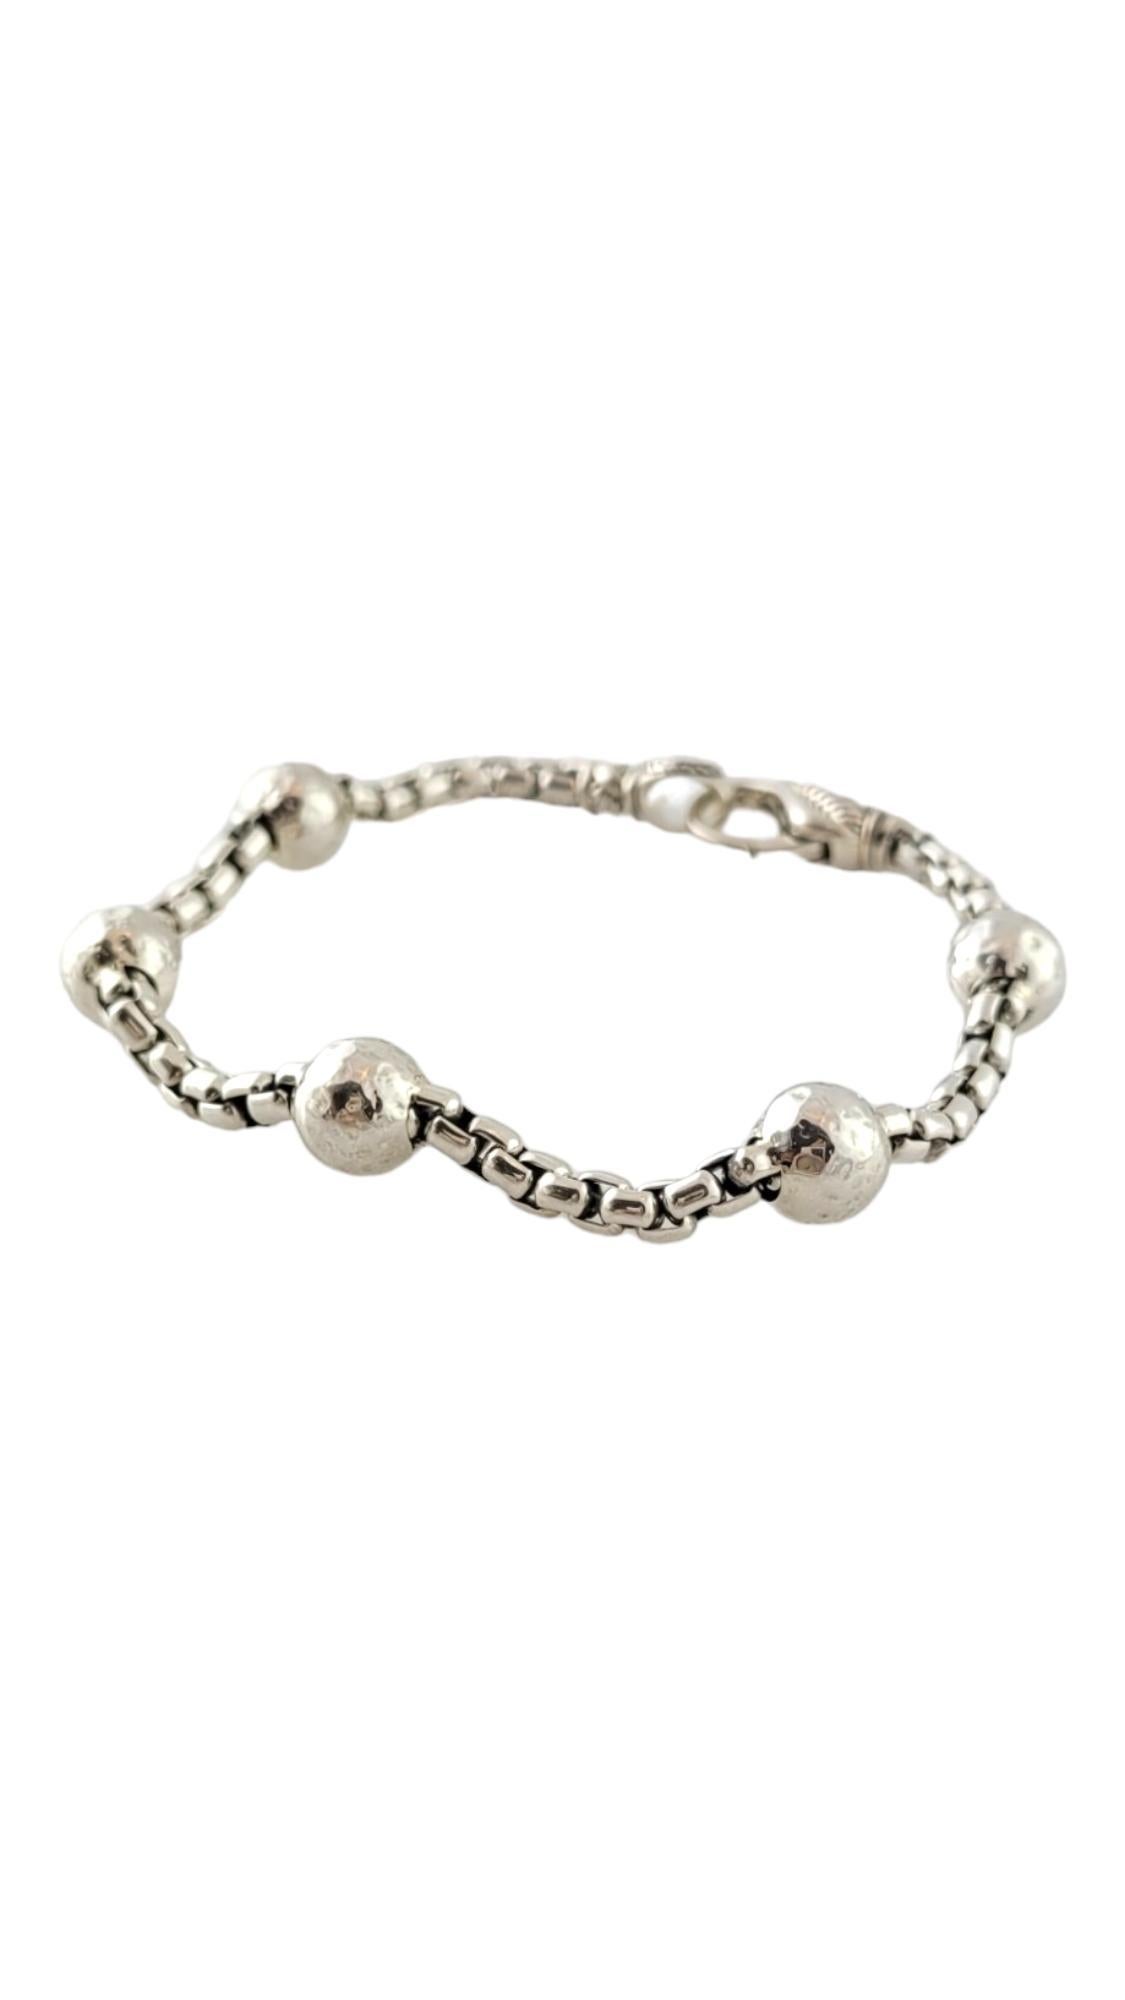 John Hardy JAi Sterling Silver Hammered Bead Box Chain Bracelet

This gorgeous sterling silver hammered bead box chain bracelet was created by designer John Hardy!

Size: 6.75